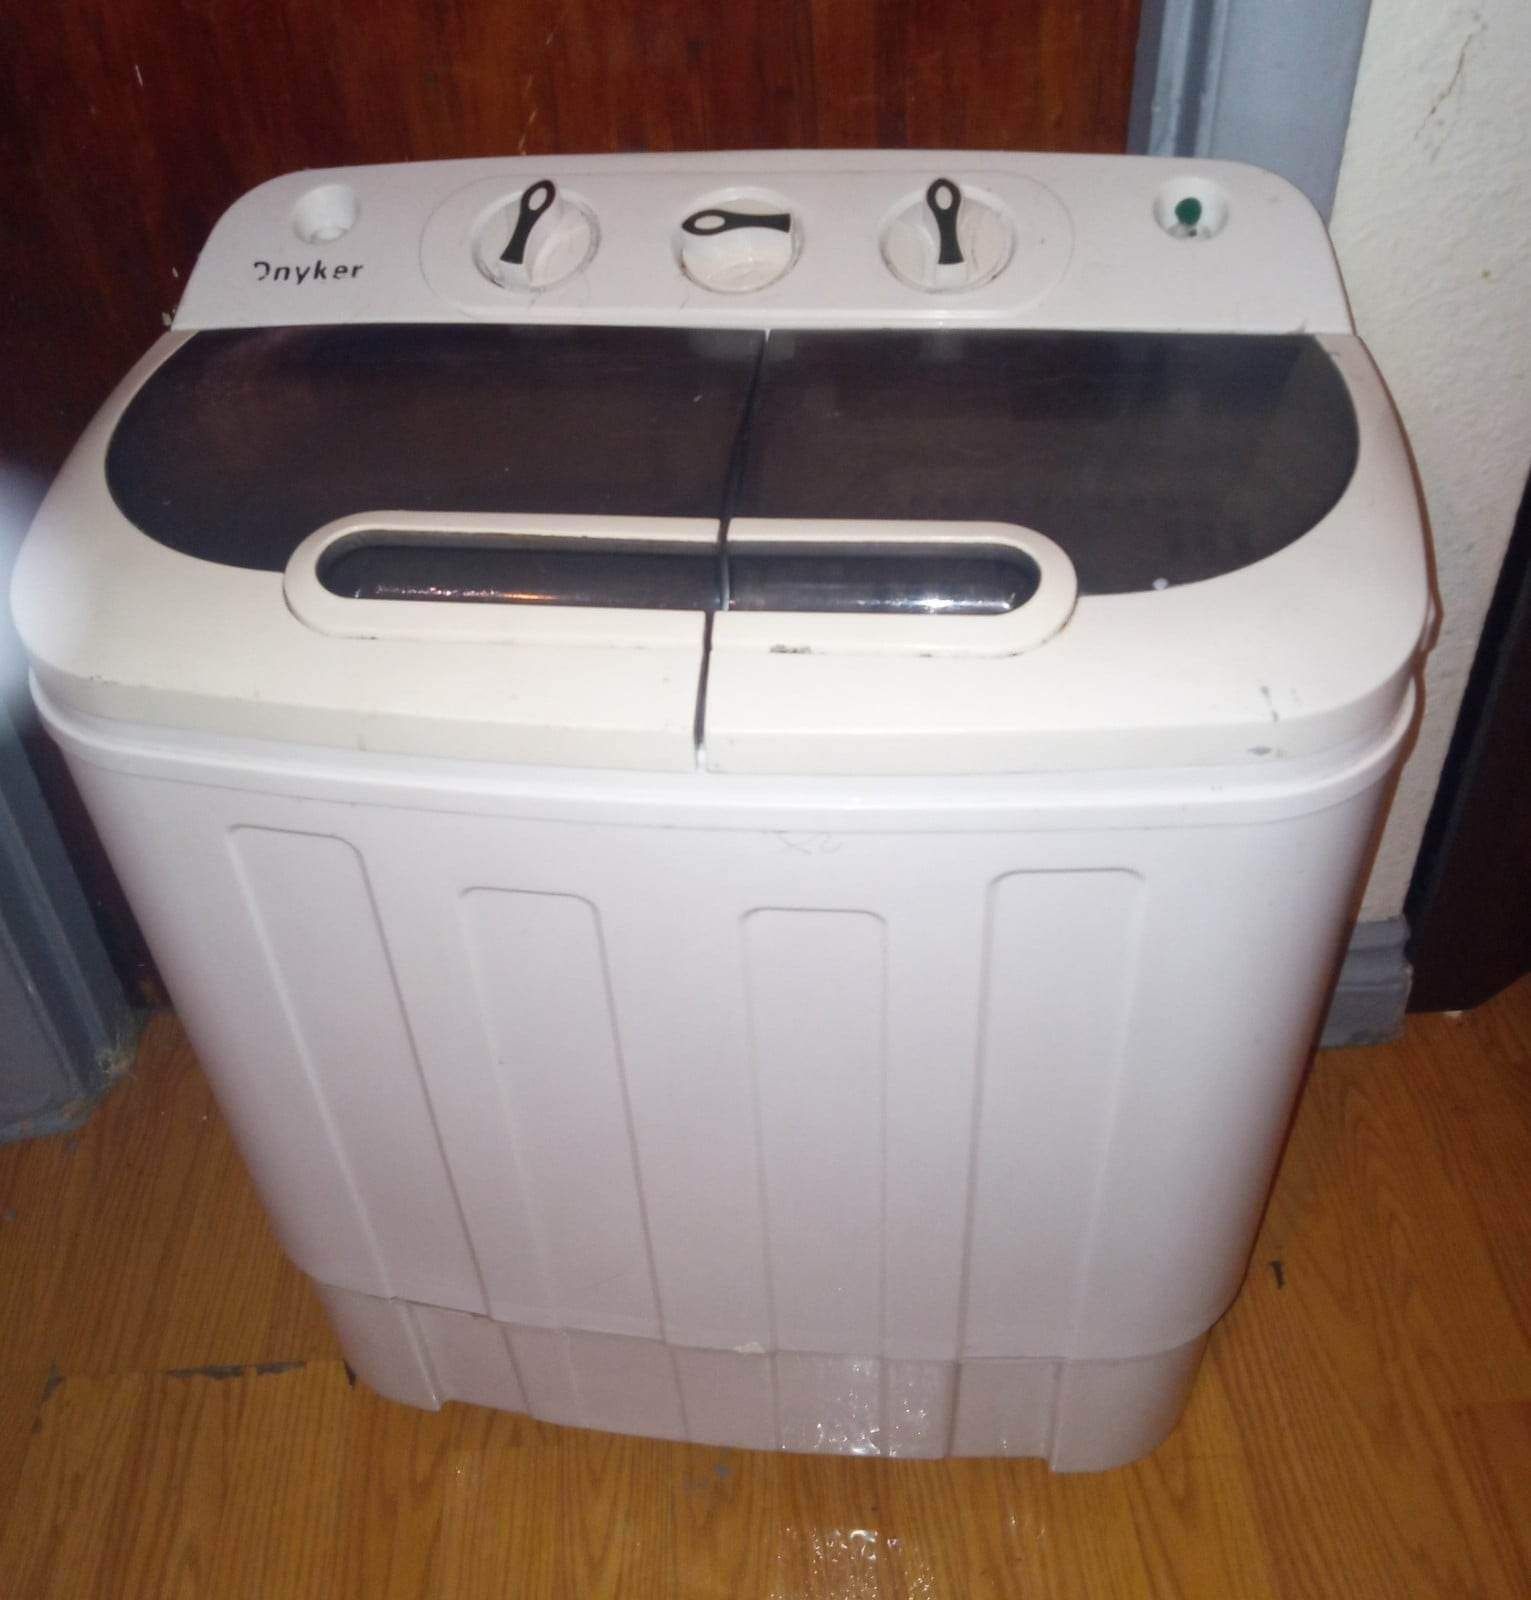 Portable mini washer and dryer/spin